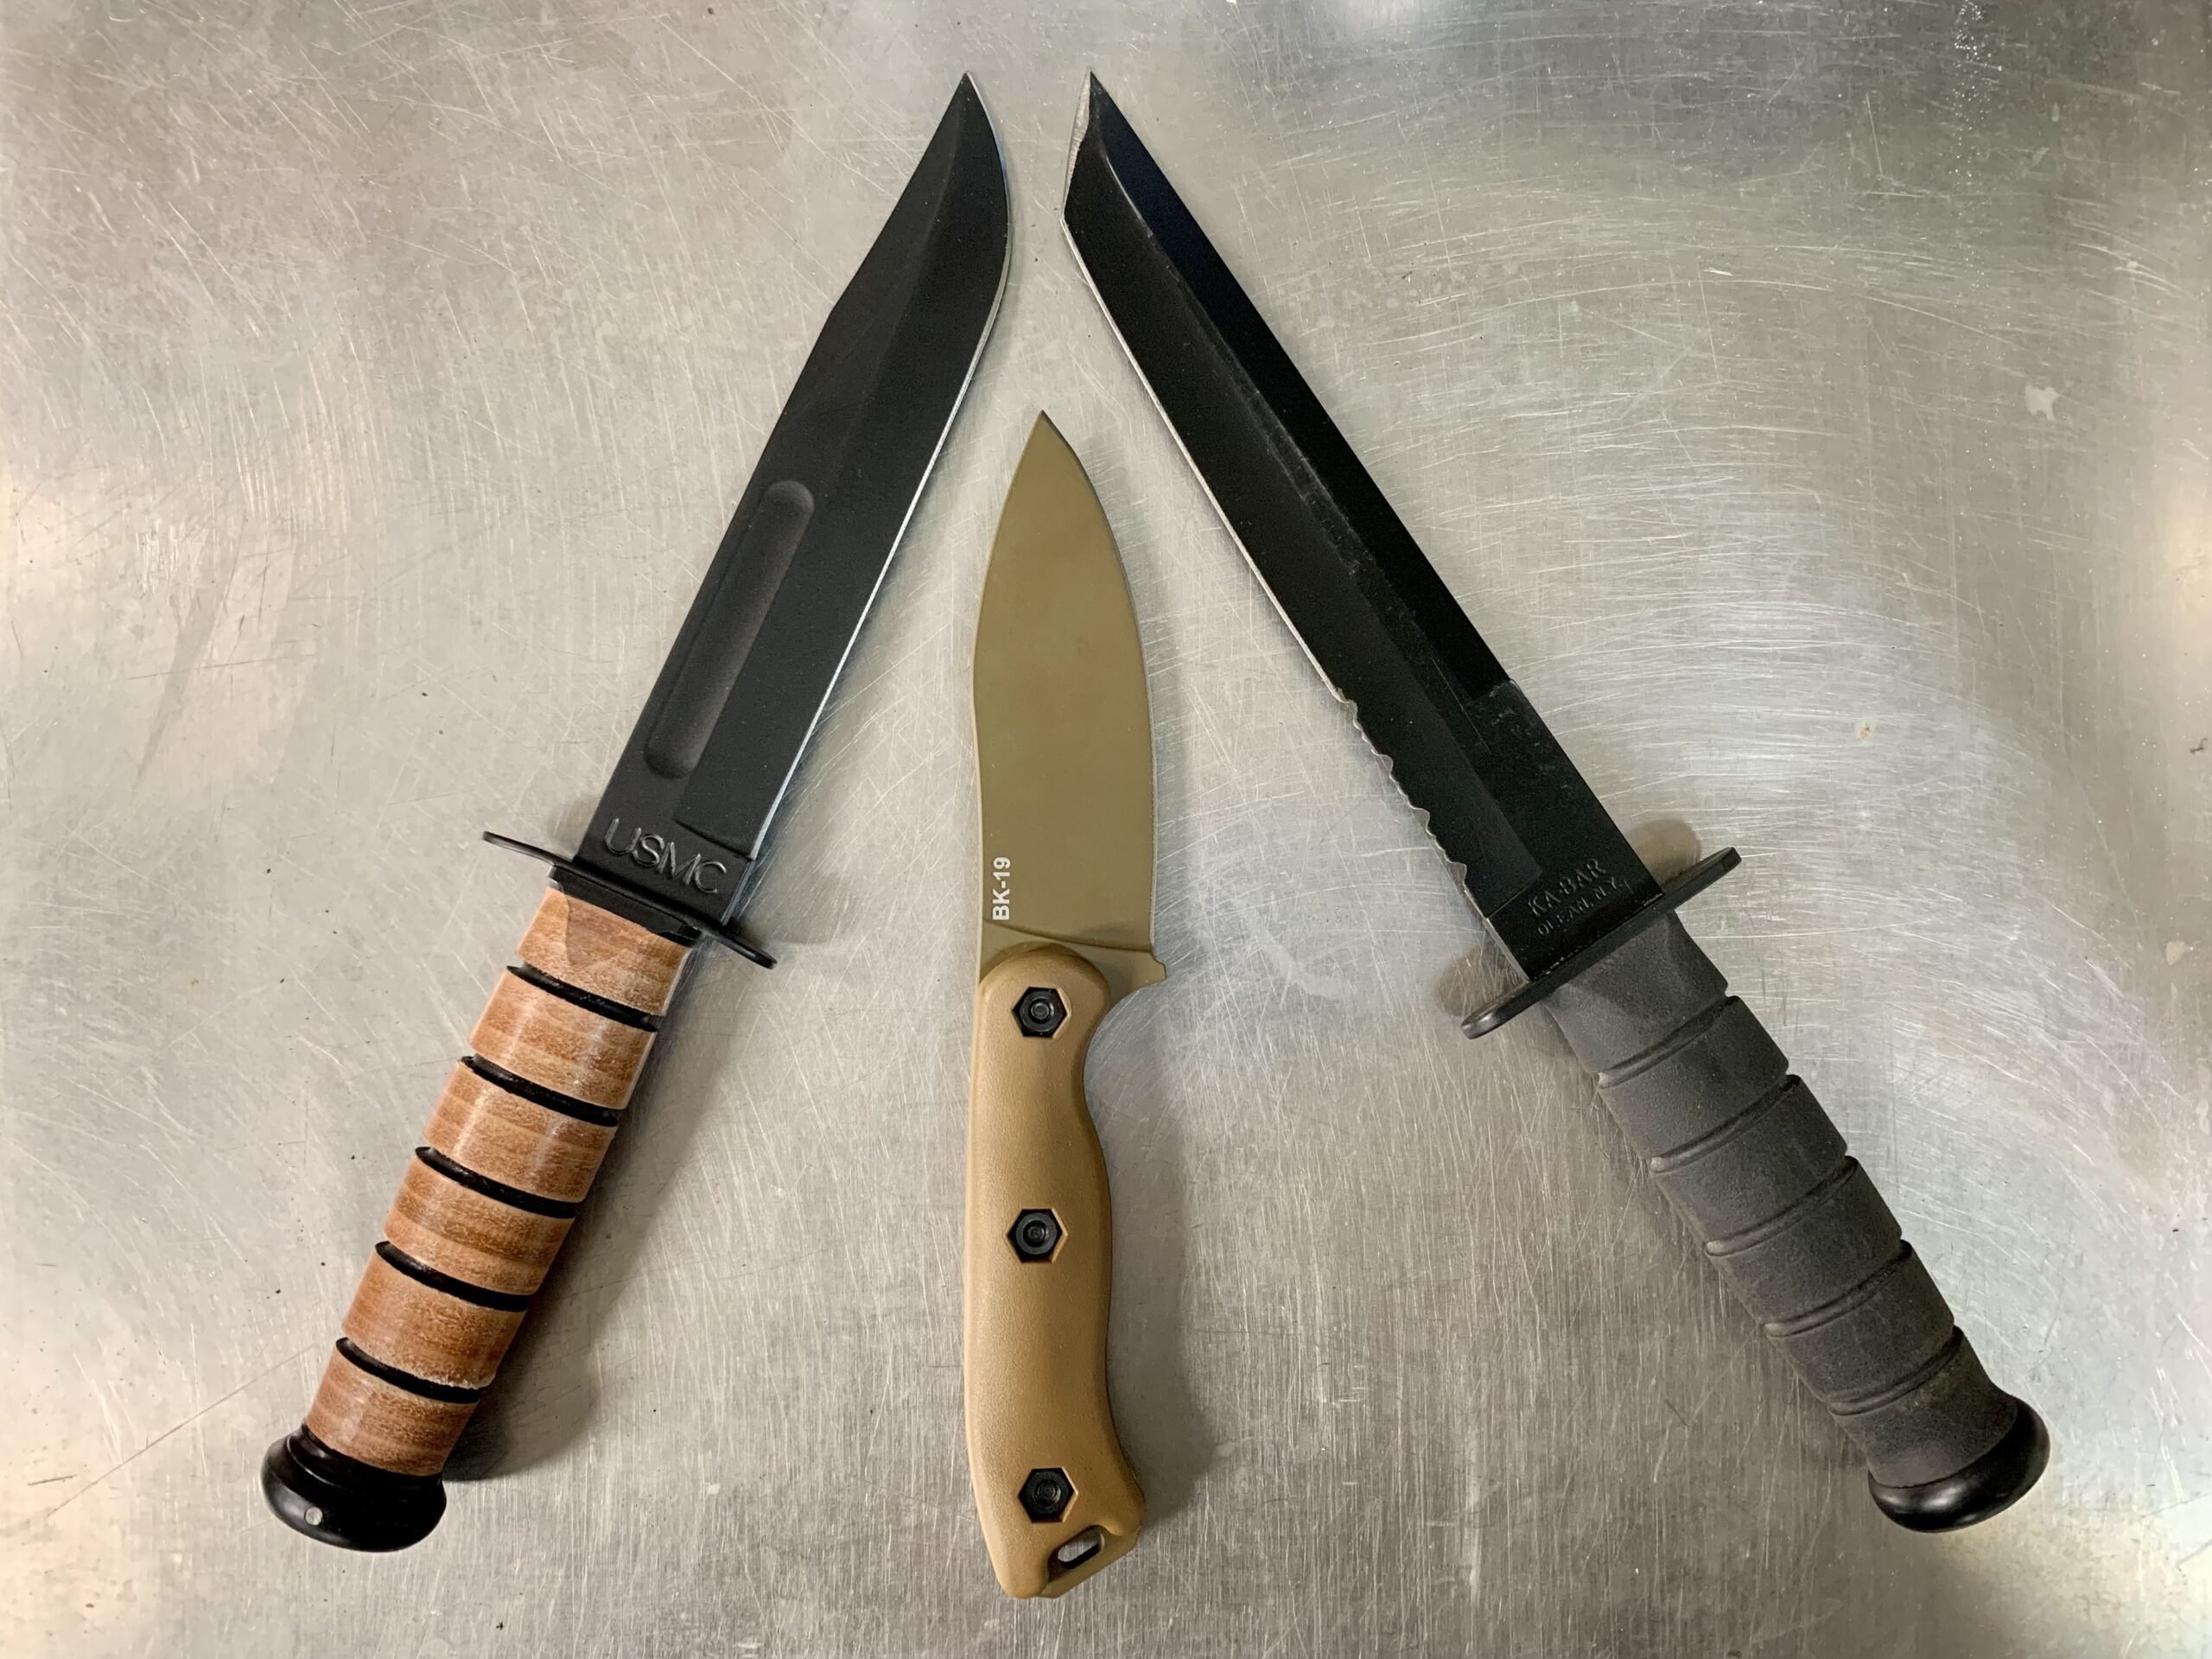 The Ka-Bar Is America's Most Famous Fighting Knife | Outdoor Life